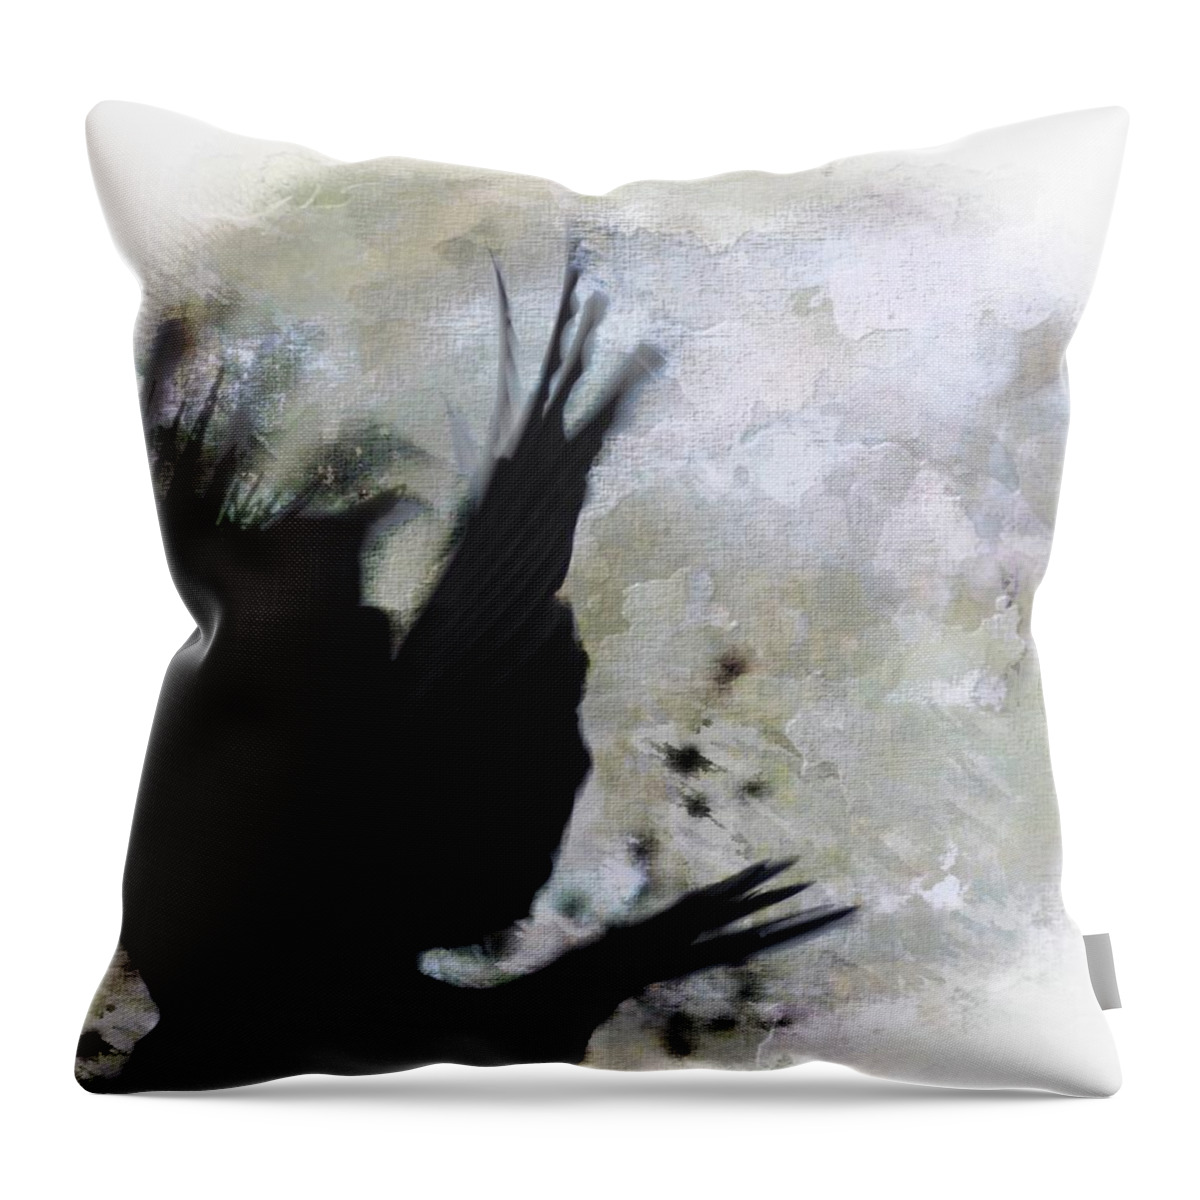  Throw Pillow featuring the photograph Crow Fly by Stoney Lawrentz